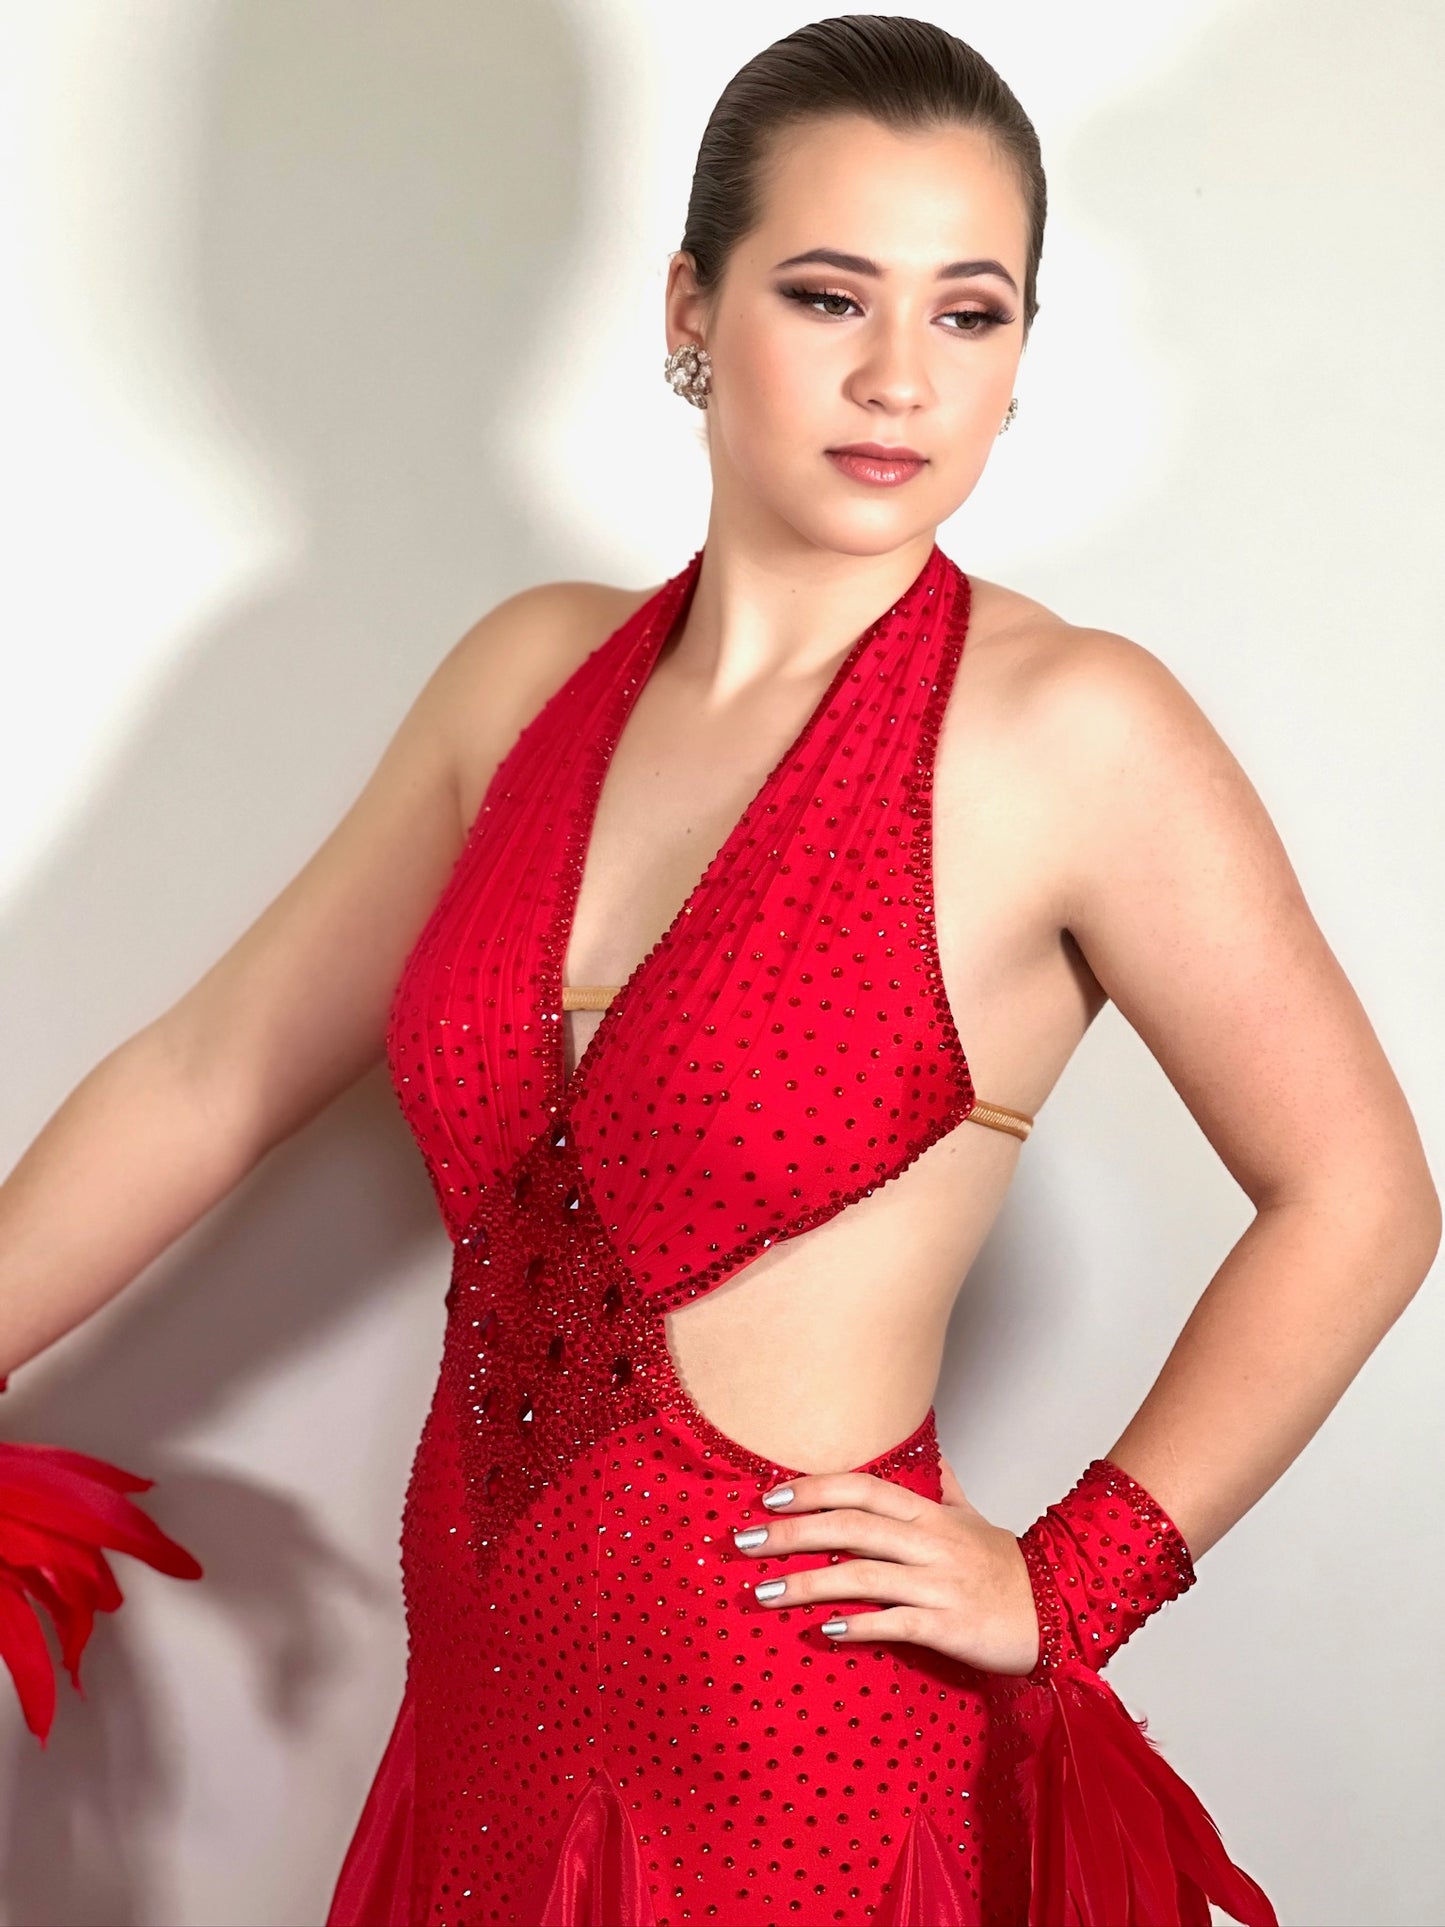 219 Red Sleeveless/Backless Ballroom/Smooth halter neck Dress. Feature panelling to the waist. Long Glove let’s with feather detailing. Flesh strapping to the chest and back.